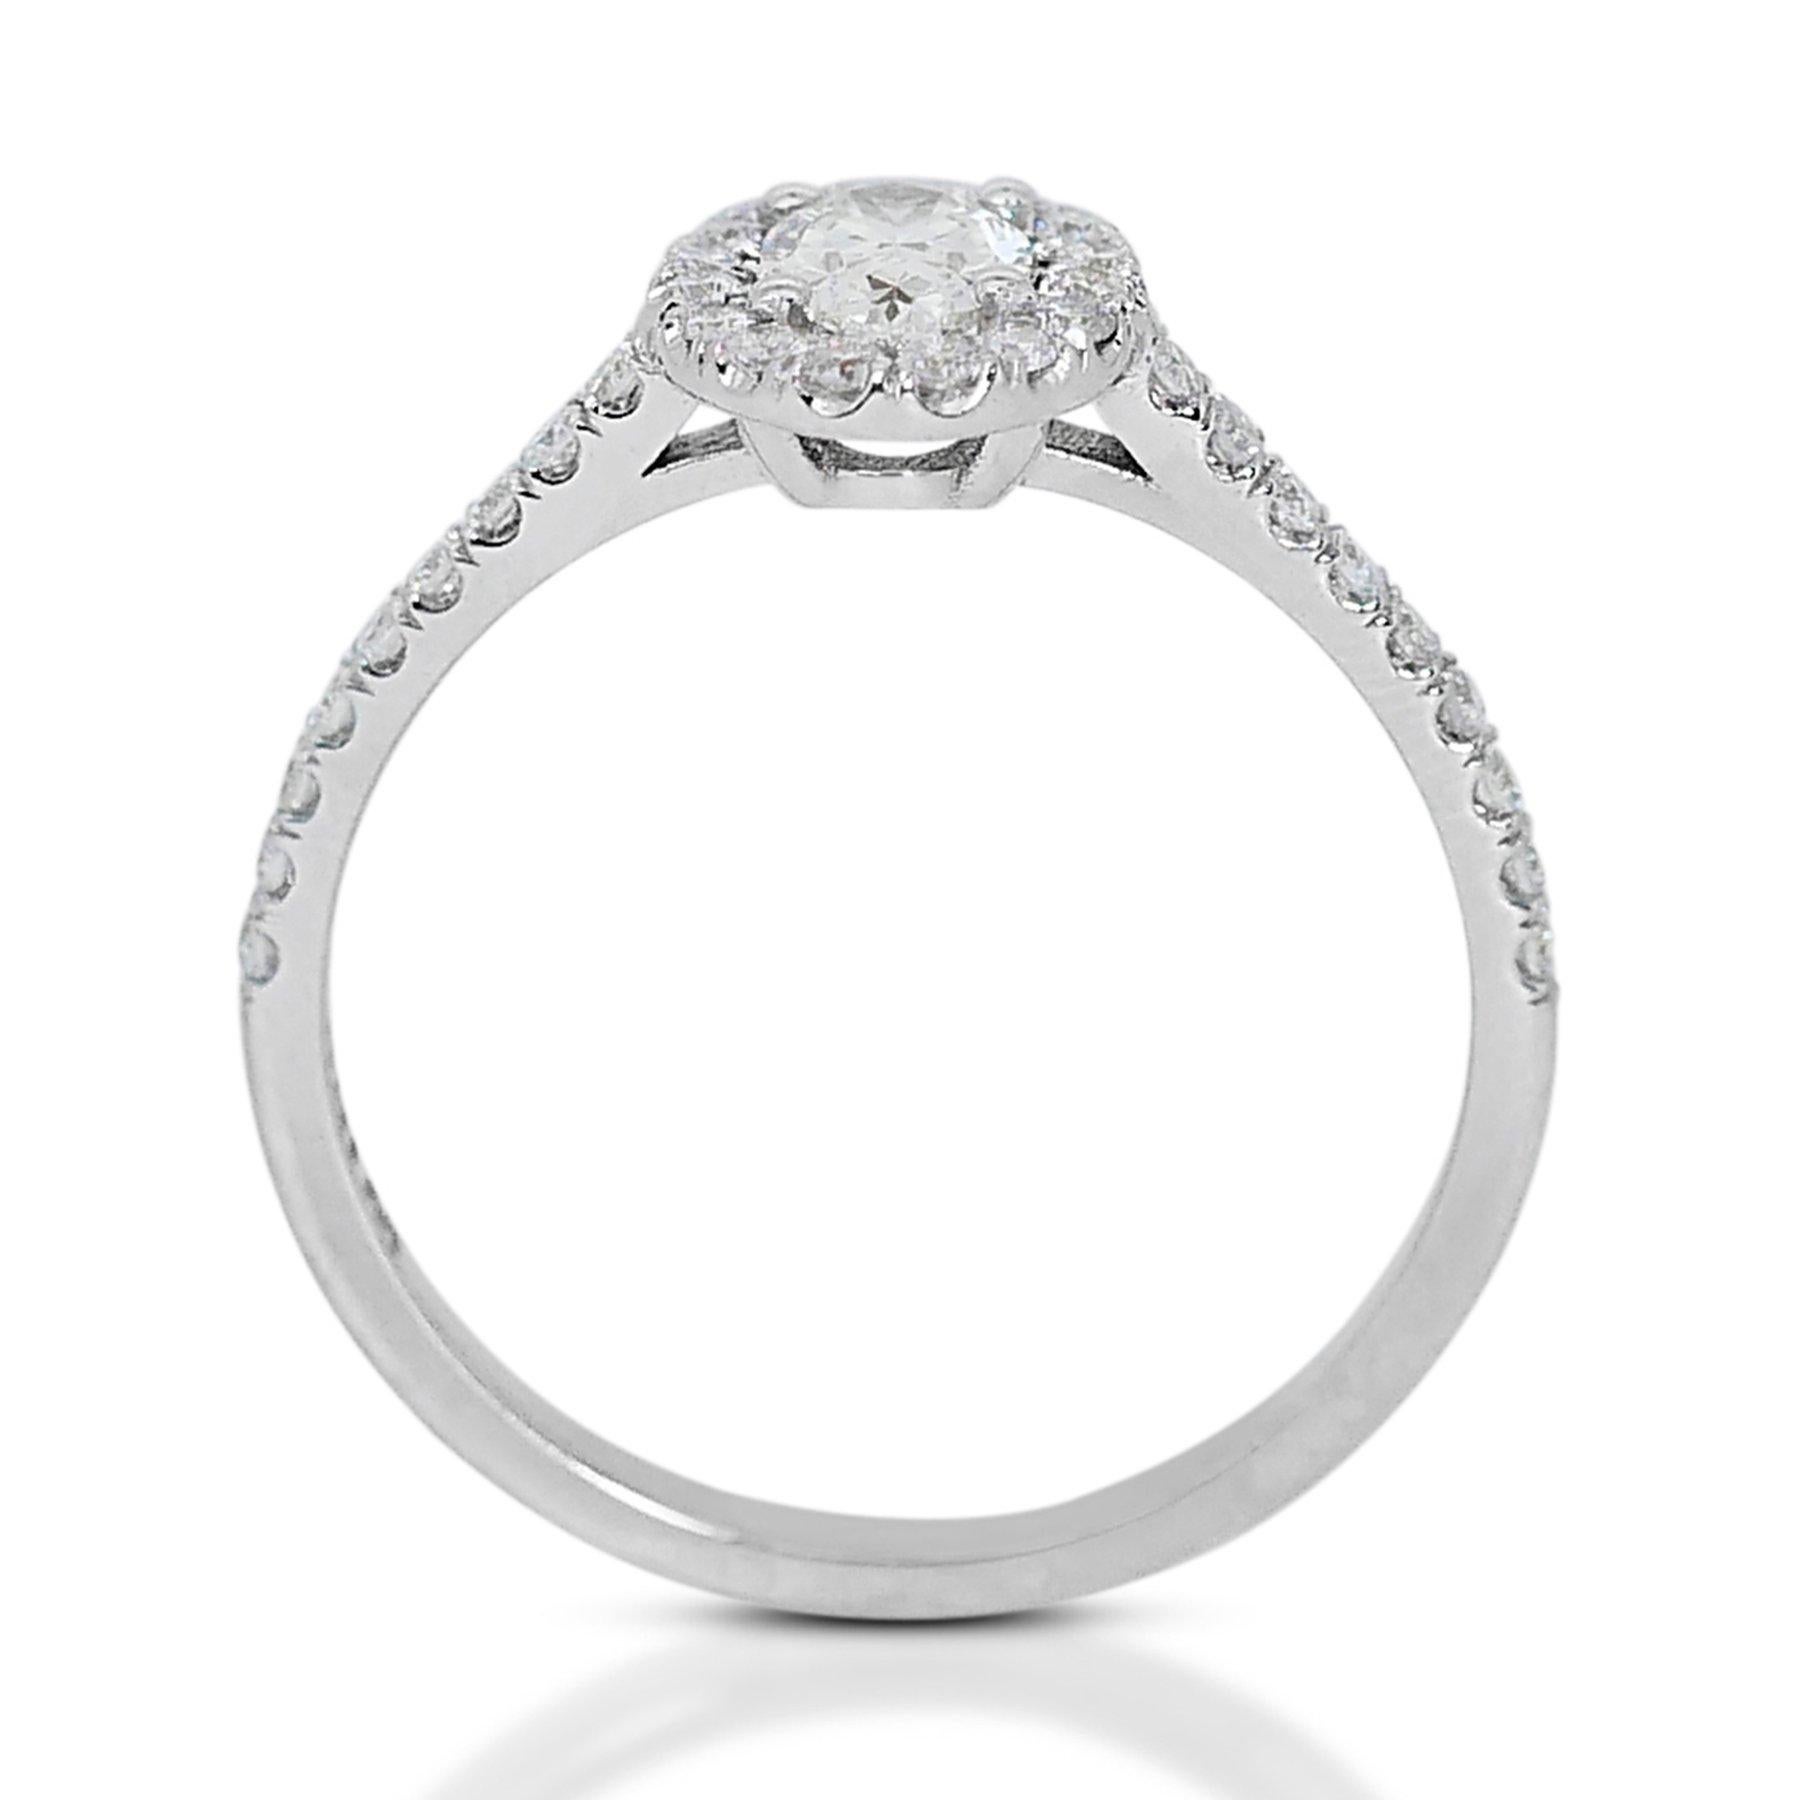 Captivating 1.01 ct Oval Diamond Halo Ring in 18k White Gold – GIA Certified For Sale 2